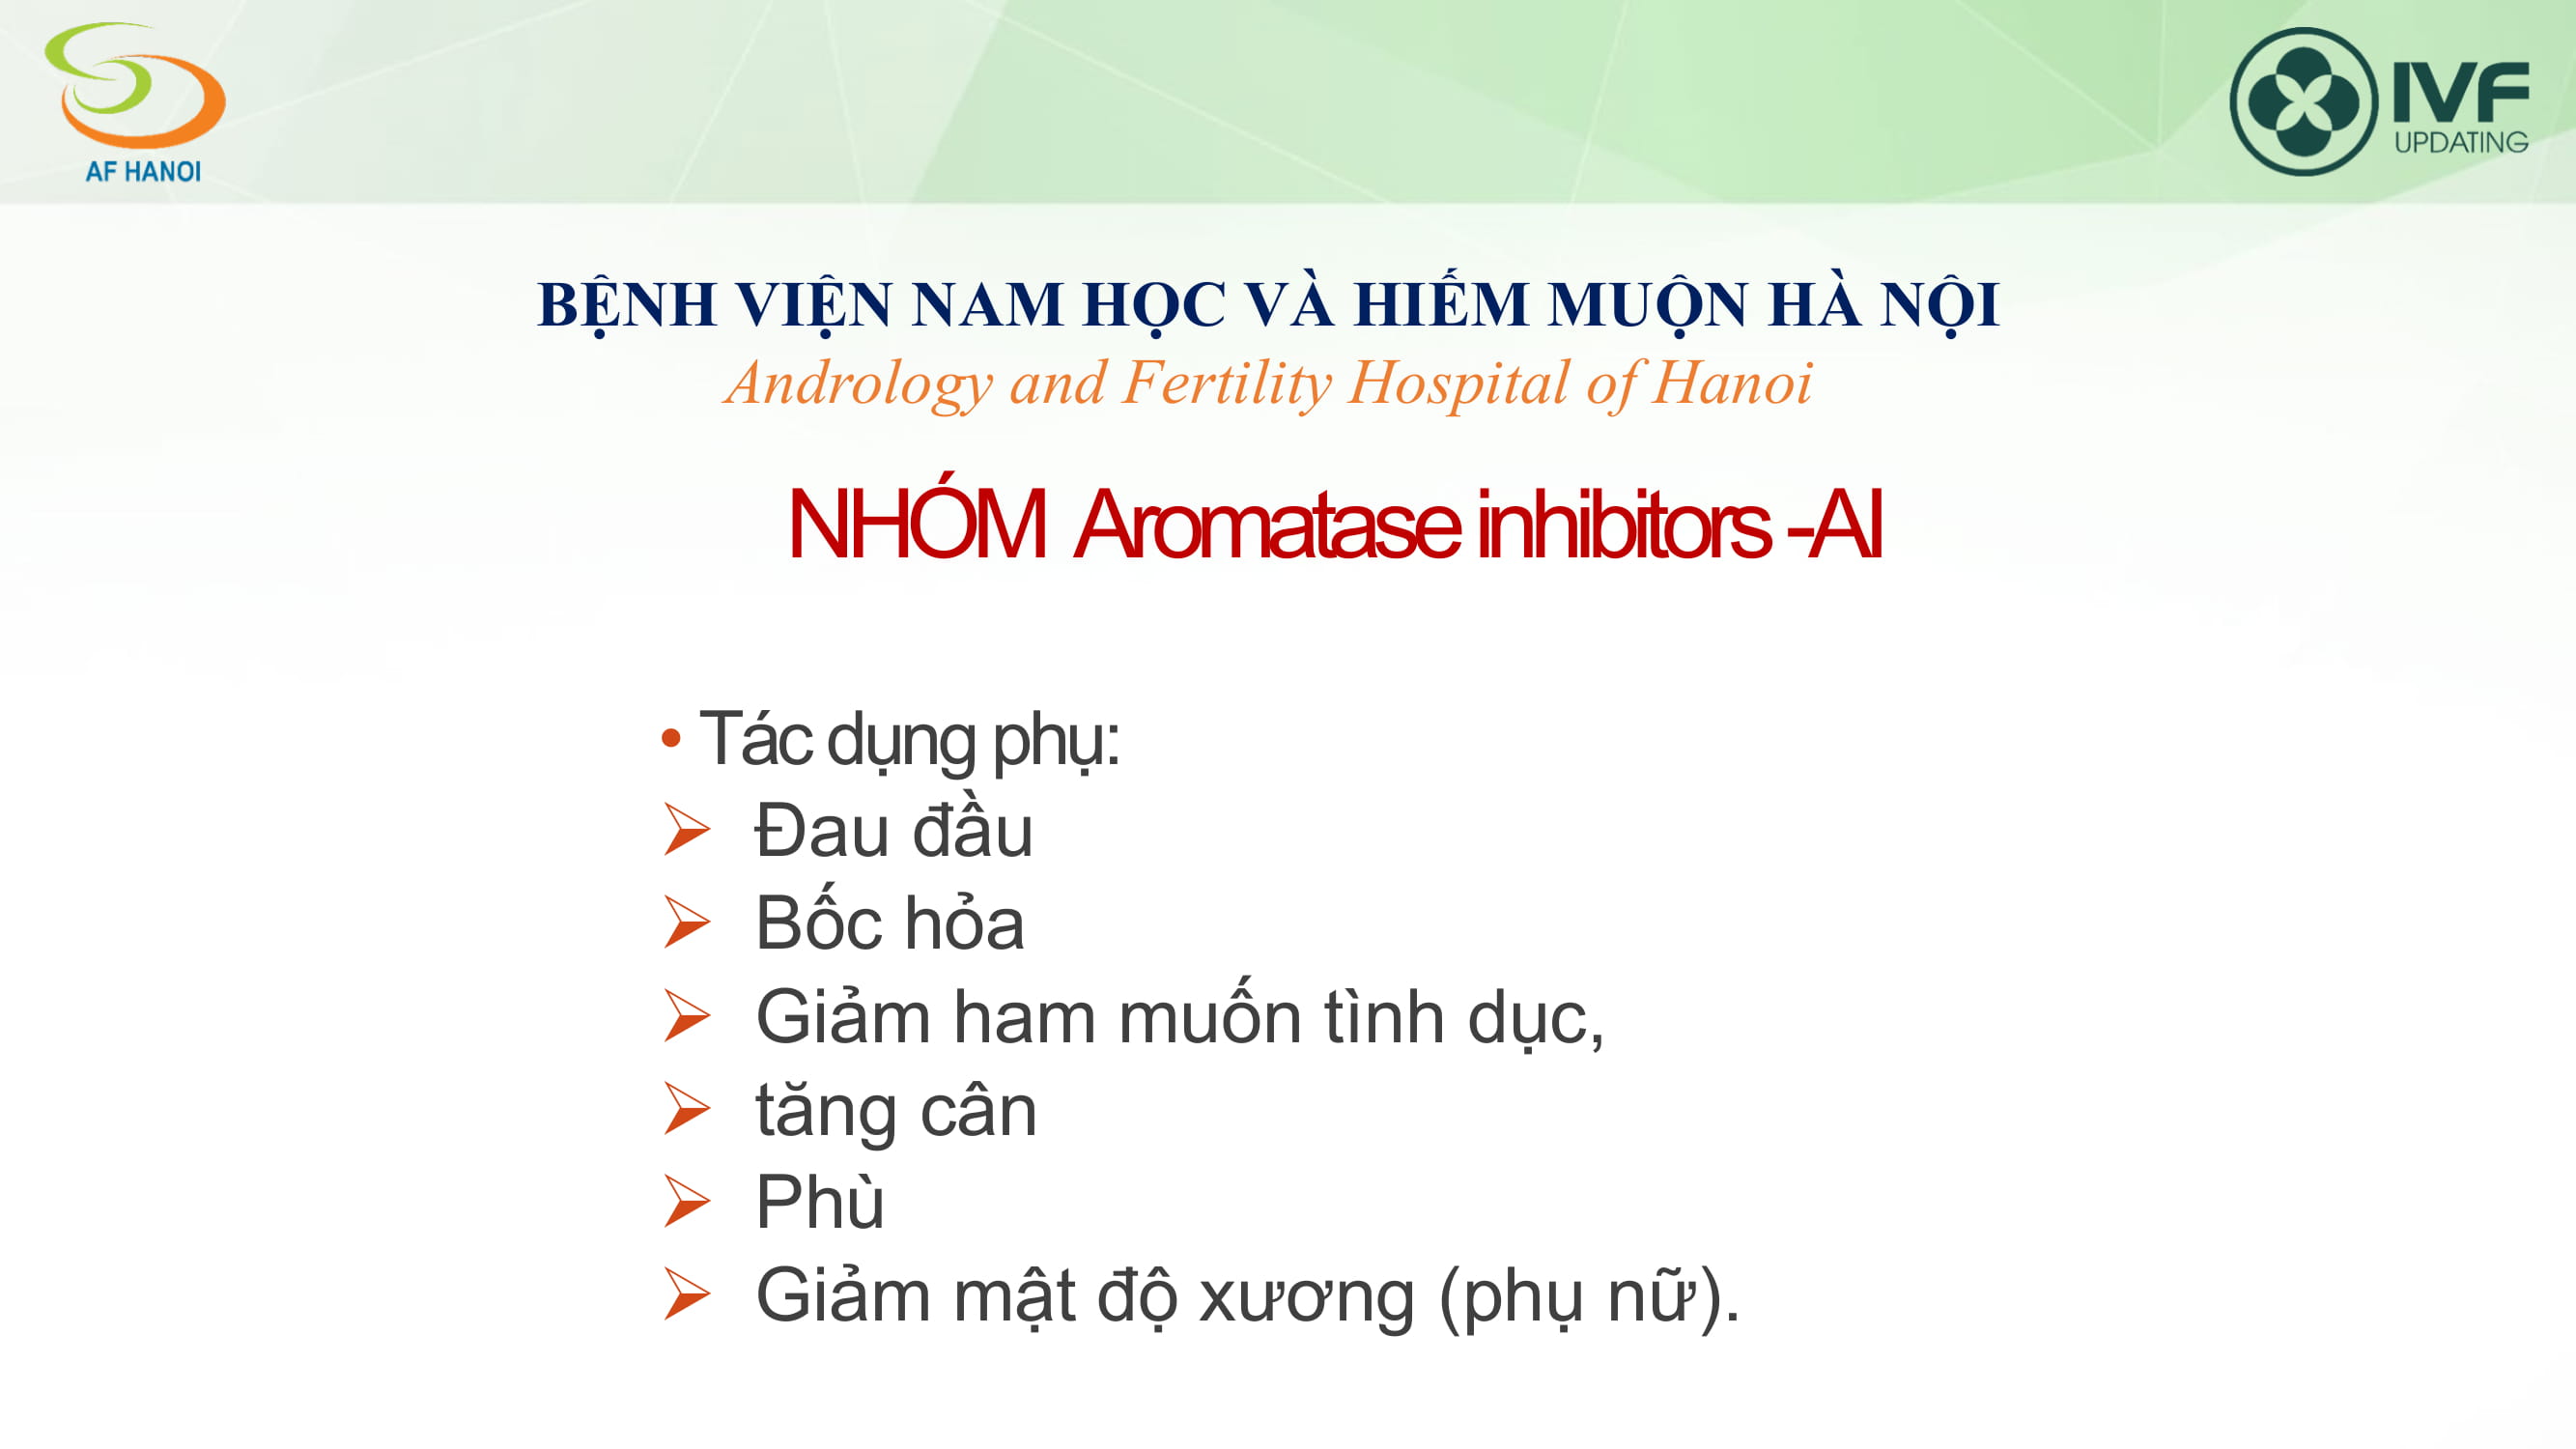 BS Nguyen Ba Hung - Chi dinh thuoc kich thich sinh tinh1-41